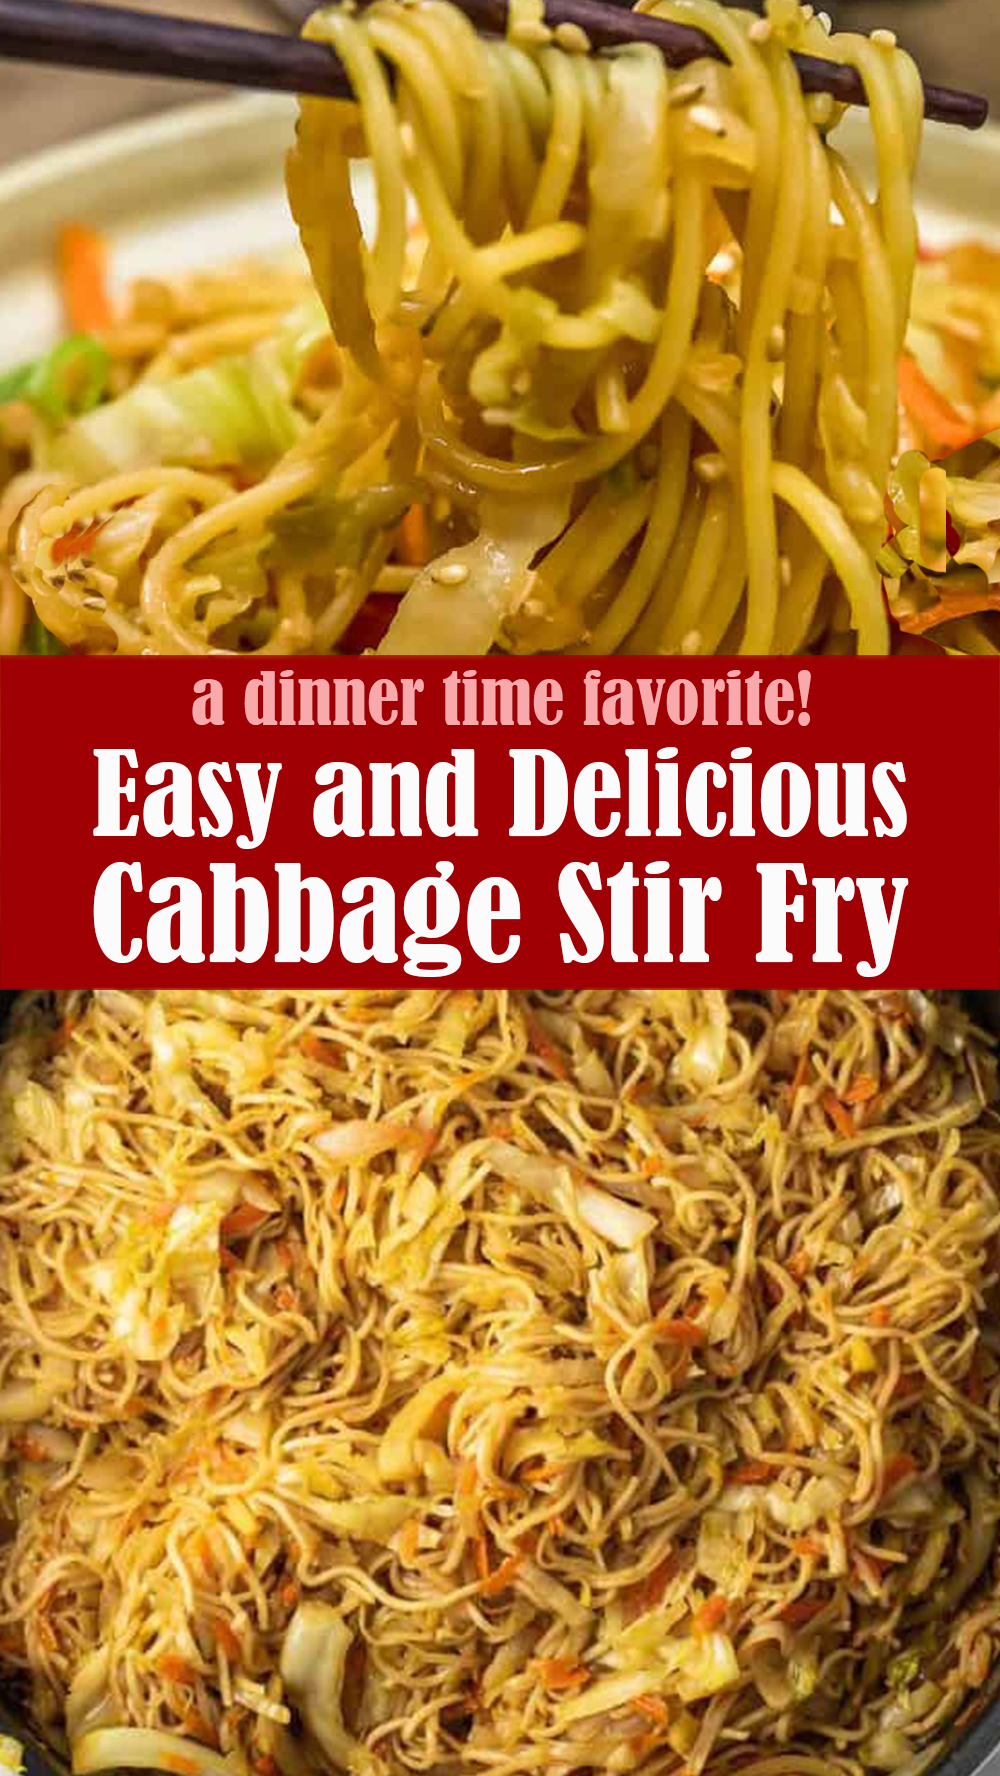 Easy and Delicious Cabbage Stir Fry